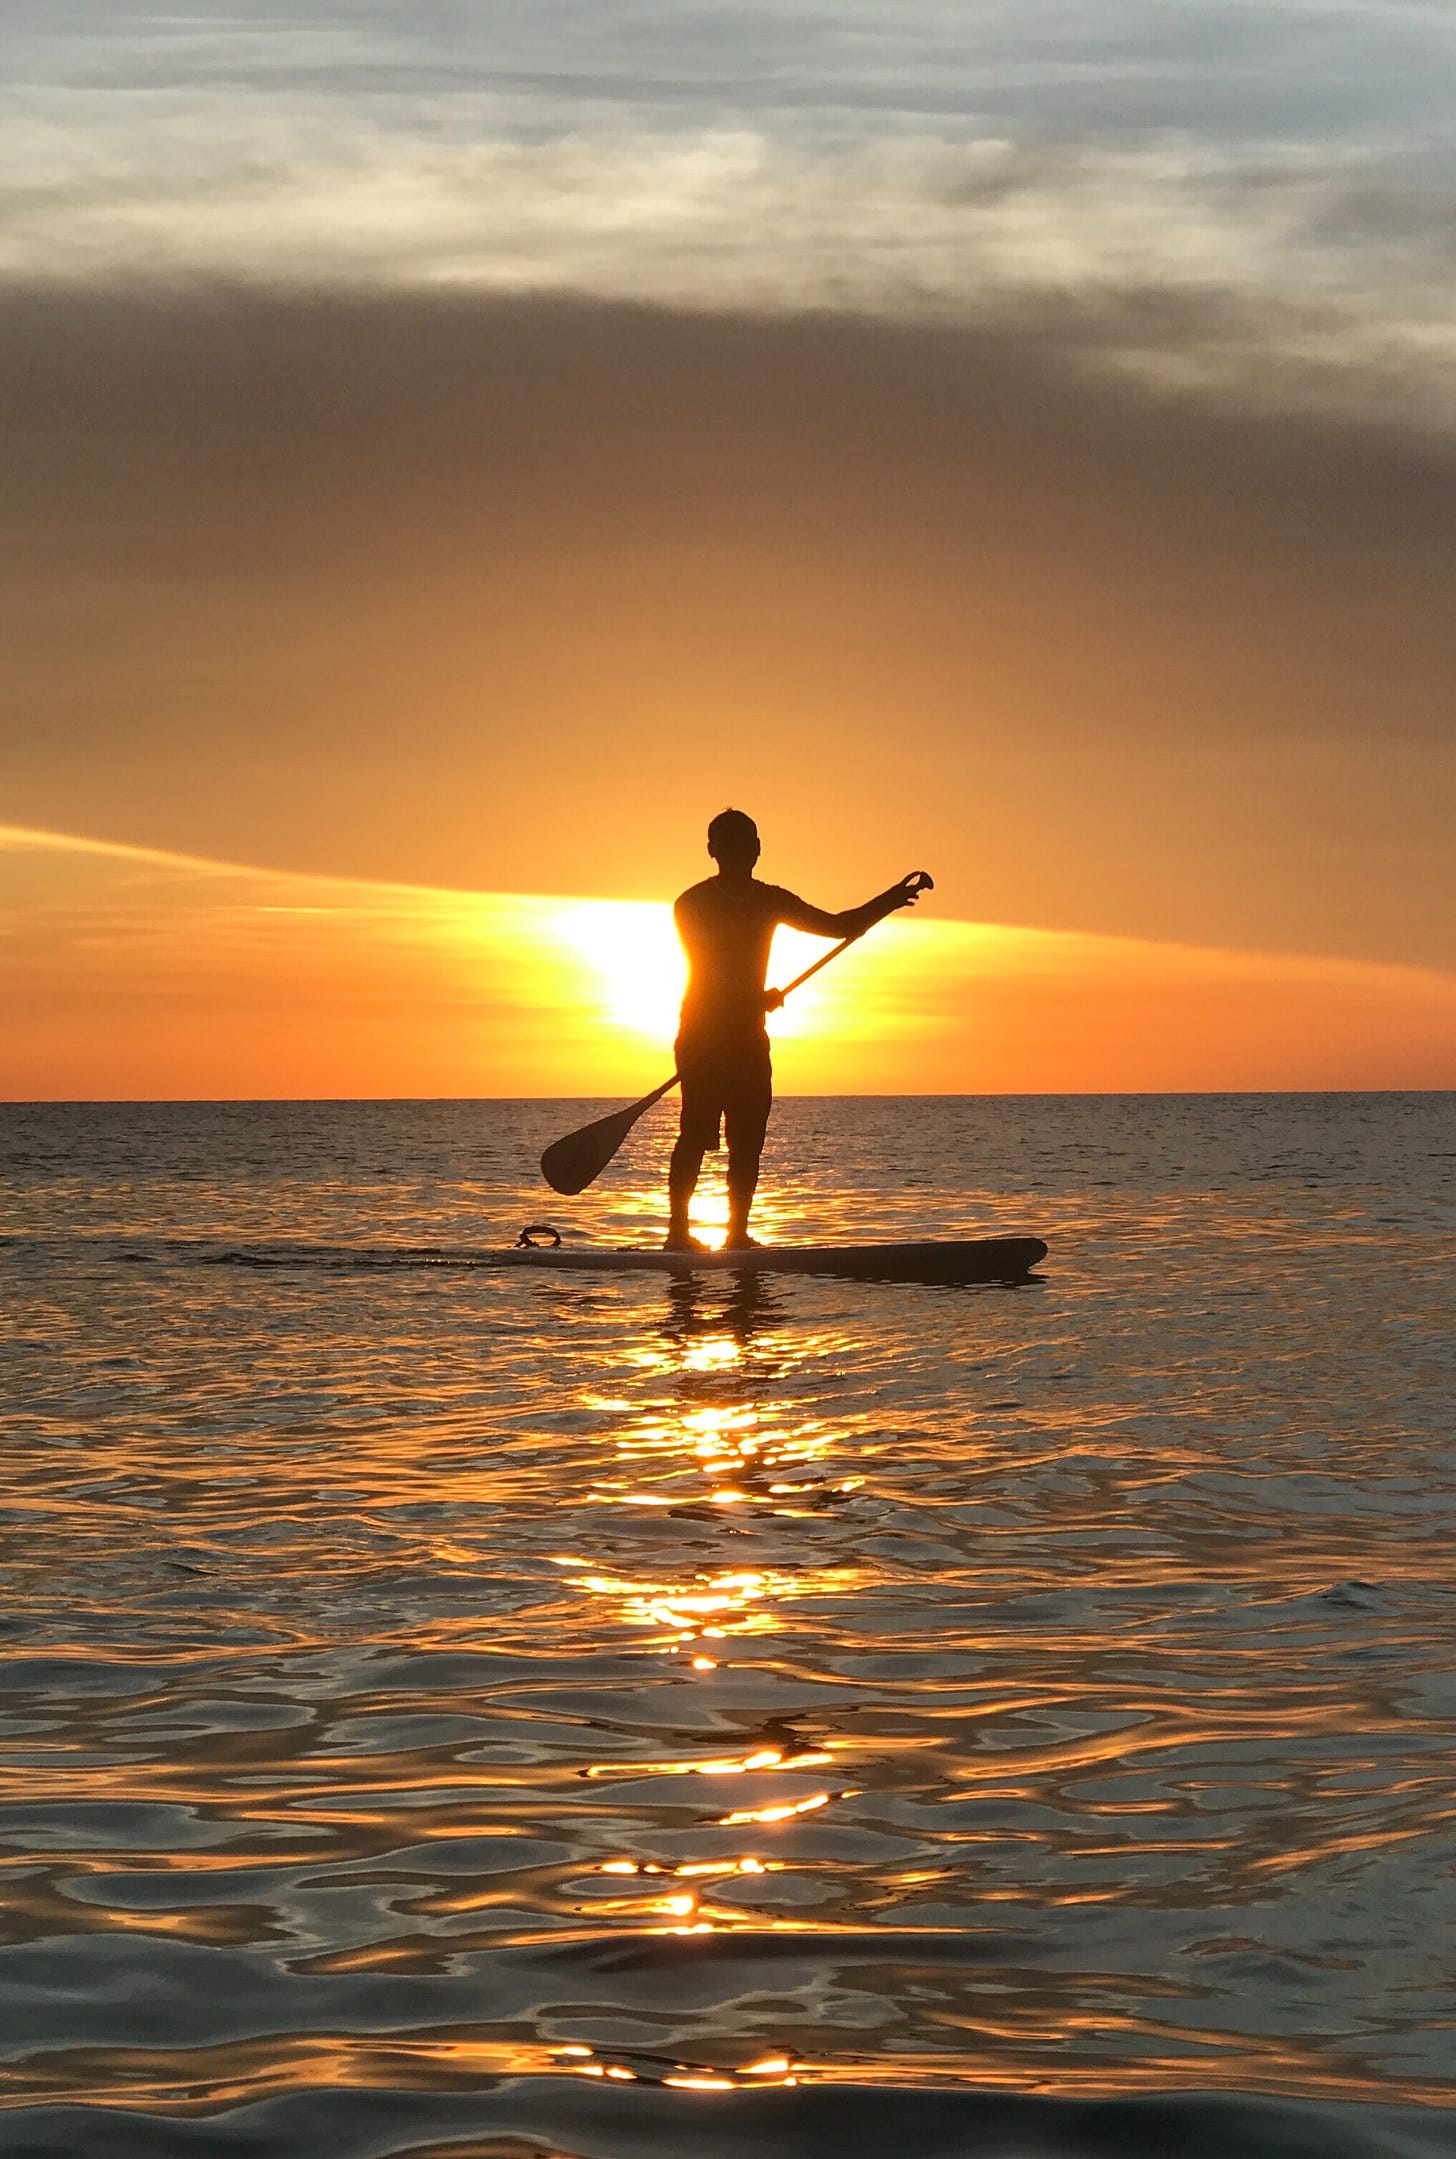 individual on a sea board silhouetted in front of the glowing sun floating on waters reflecting the sunlight.